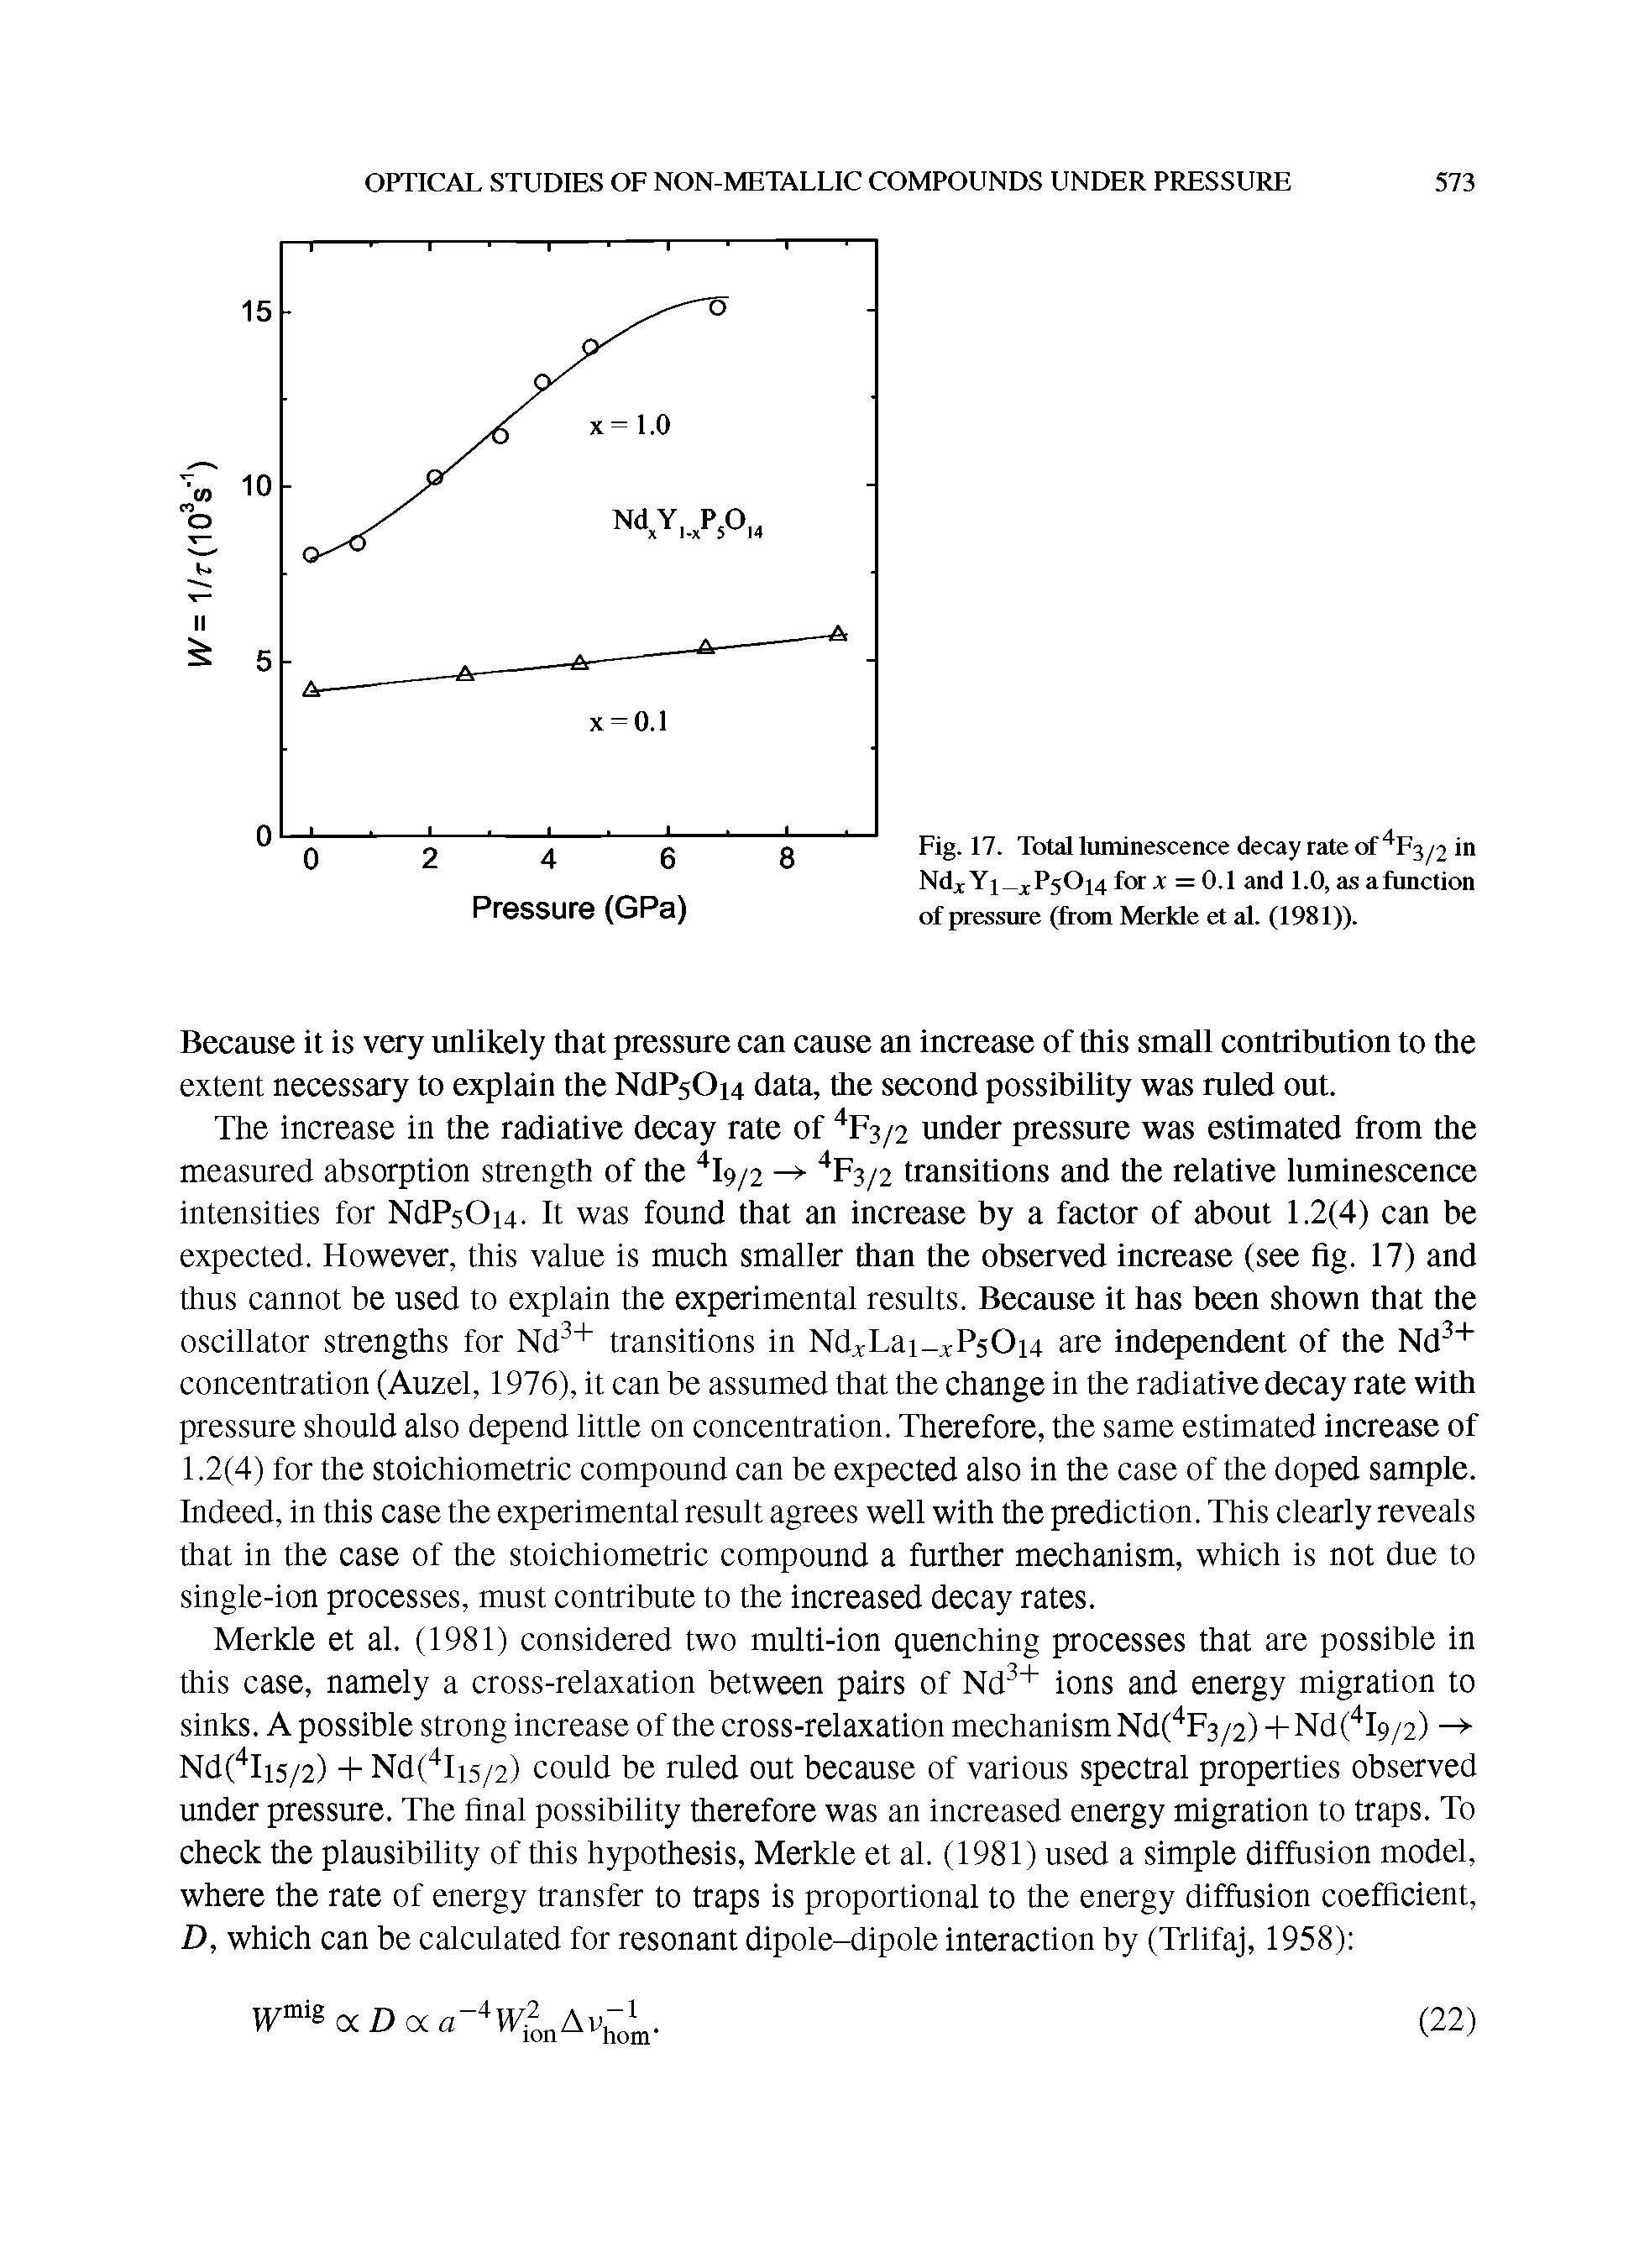 Fig. 17. Total luminescence decay rate of 4F3/ i in NdxYi xP50i4 for a = 0.1 and 1.0, as afunction of pressure (from Mcrklc et al. (1981)).